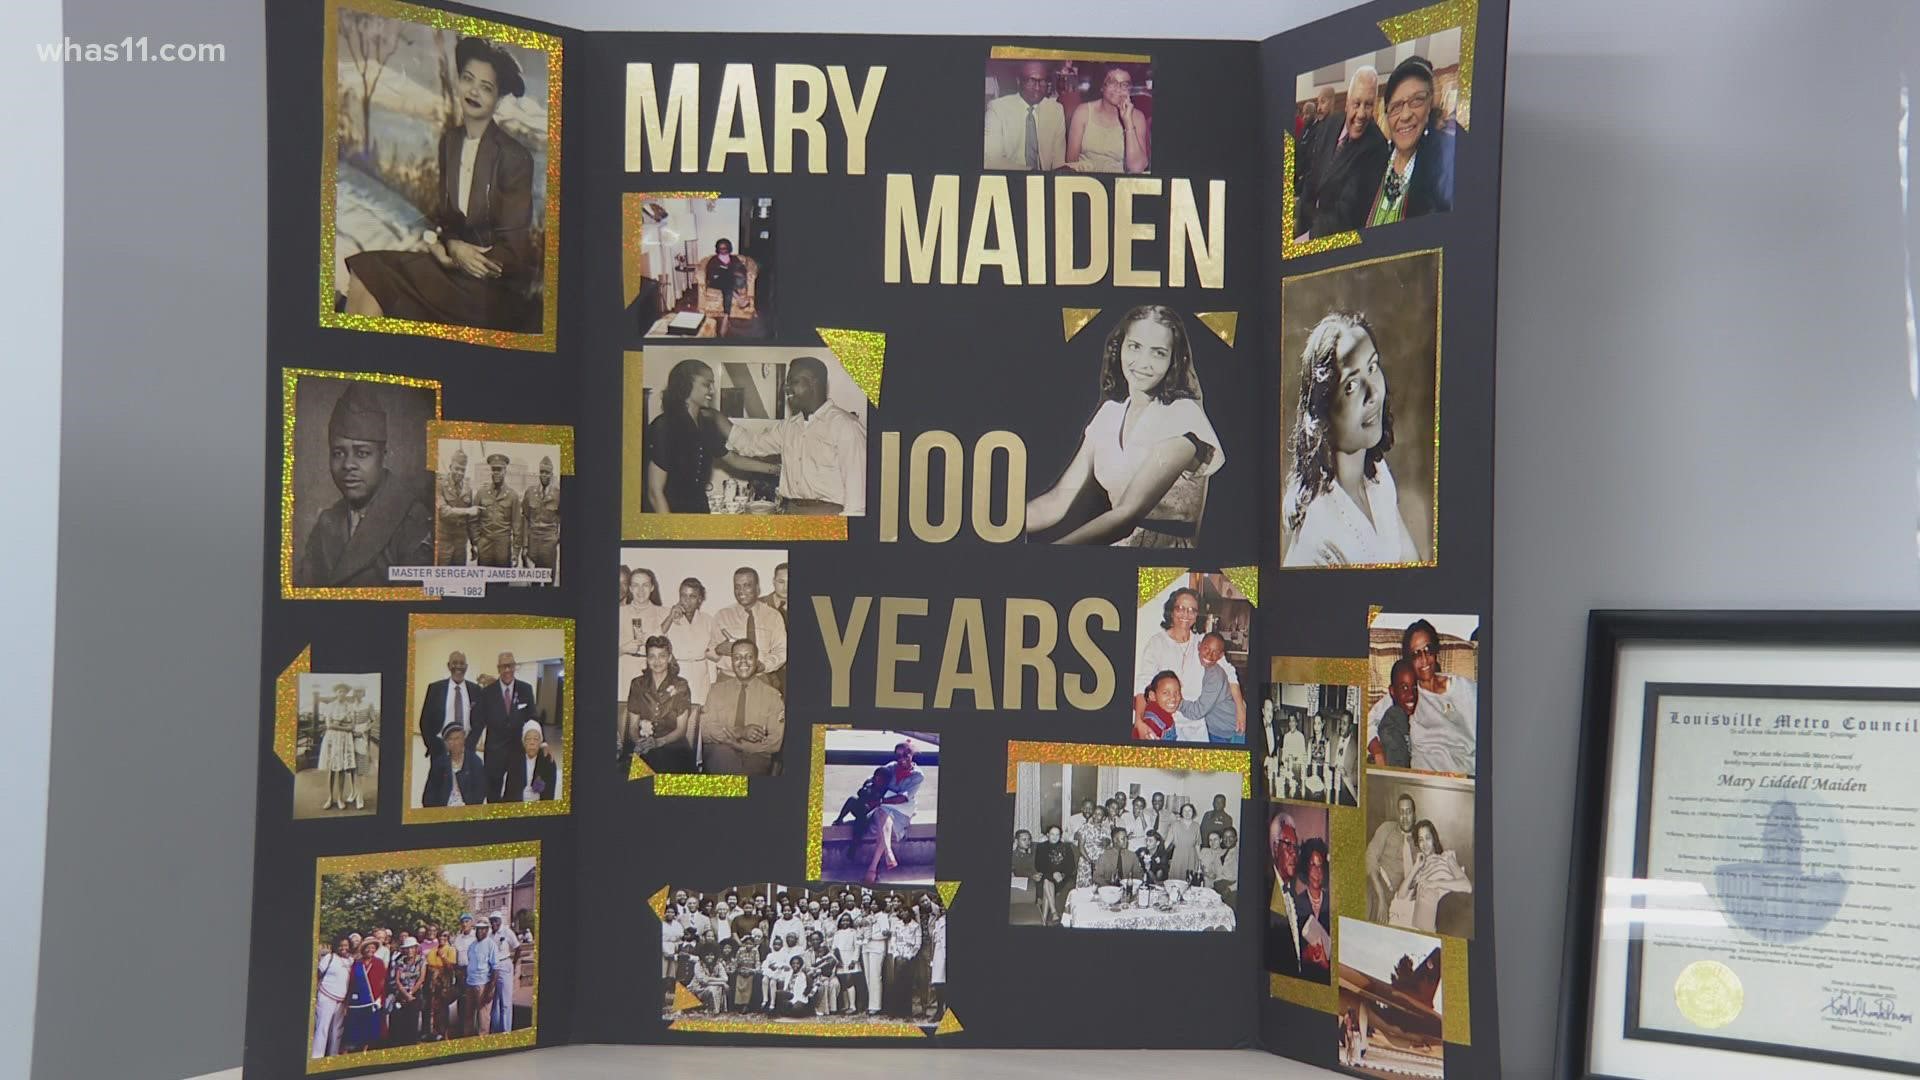 It's a big happy 100th birthday for -Mary Maiden who was born in Mississippi but moved to Fort Knox with her husband and made Louisville home.